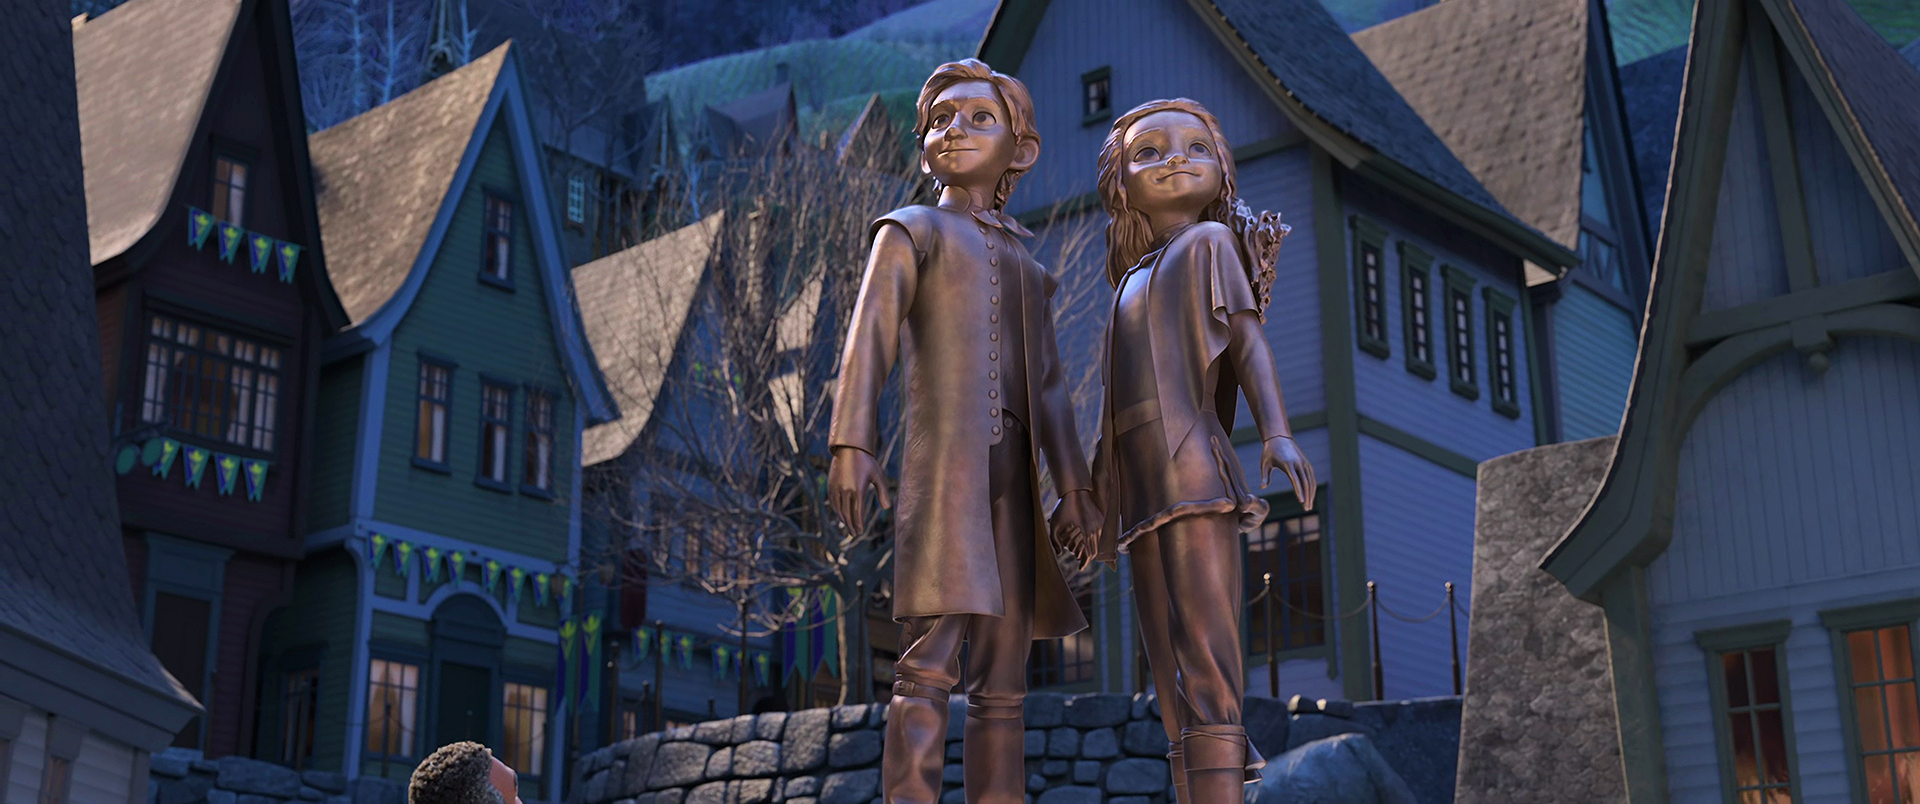 The statue of Elsa and Anna's parents stands in Arendelle's town square.